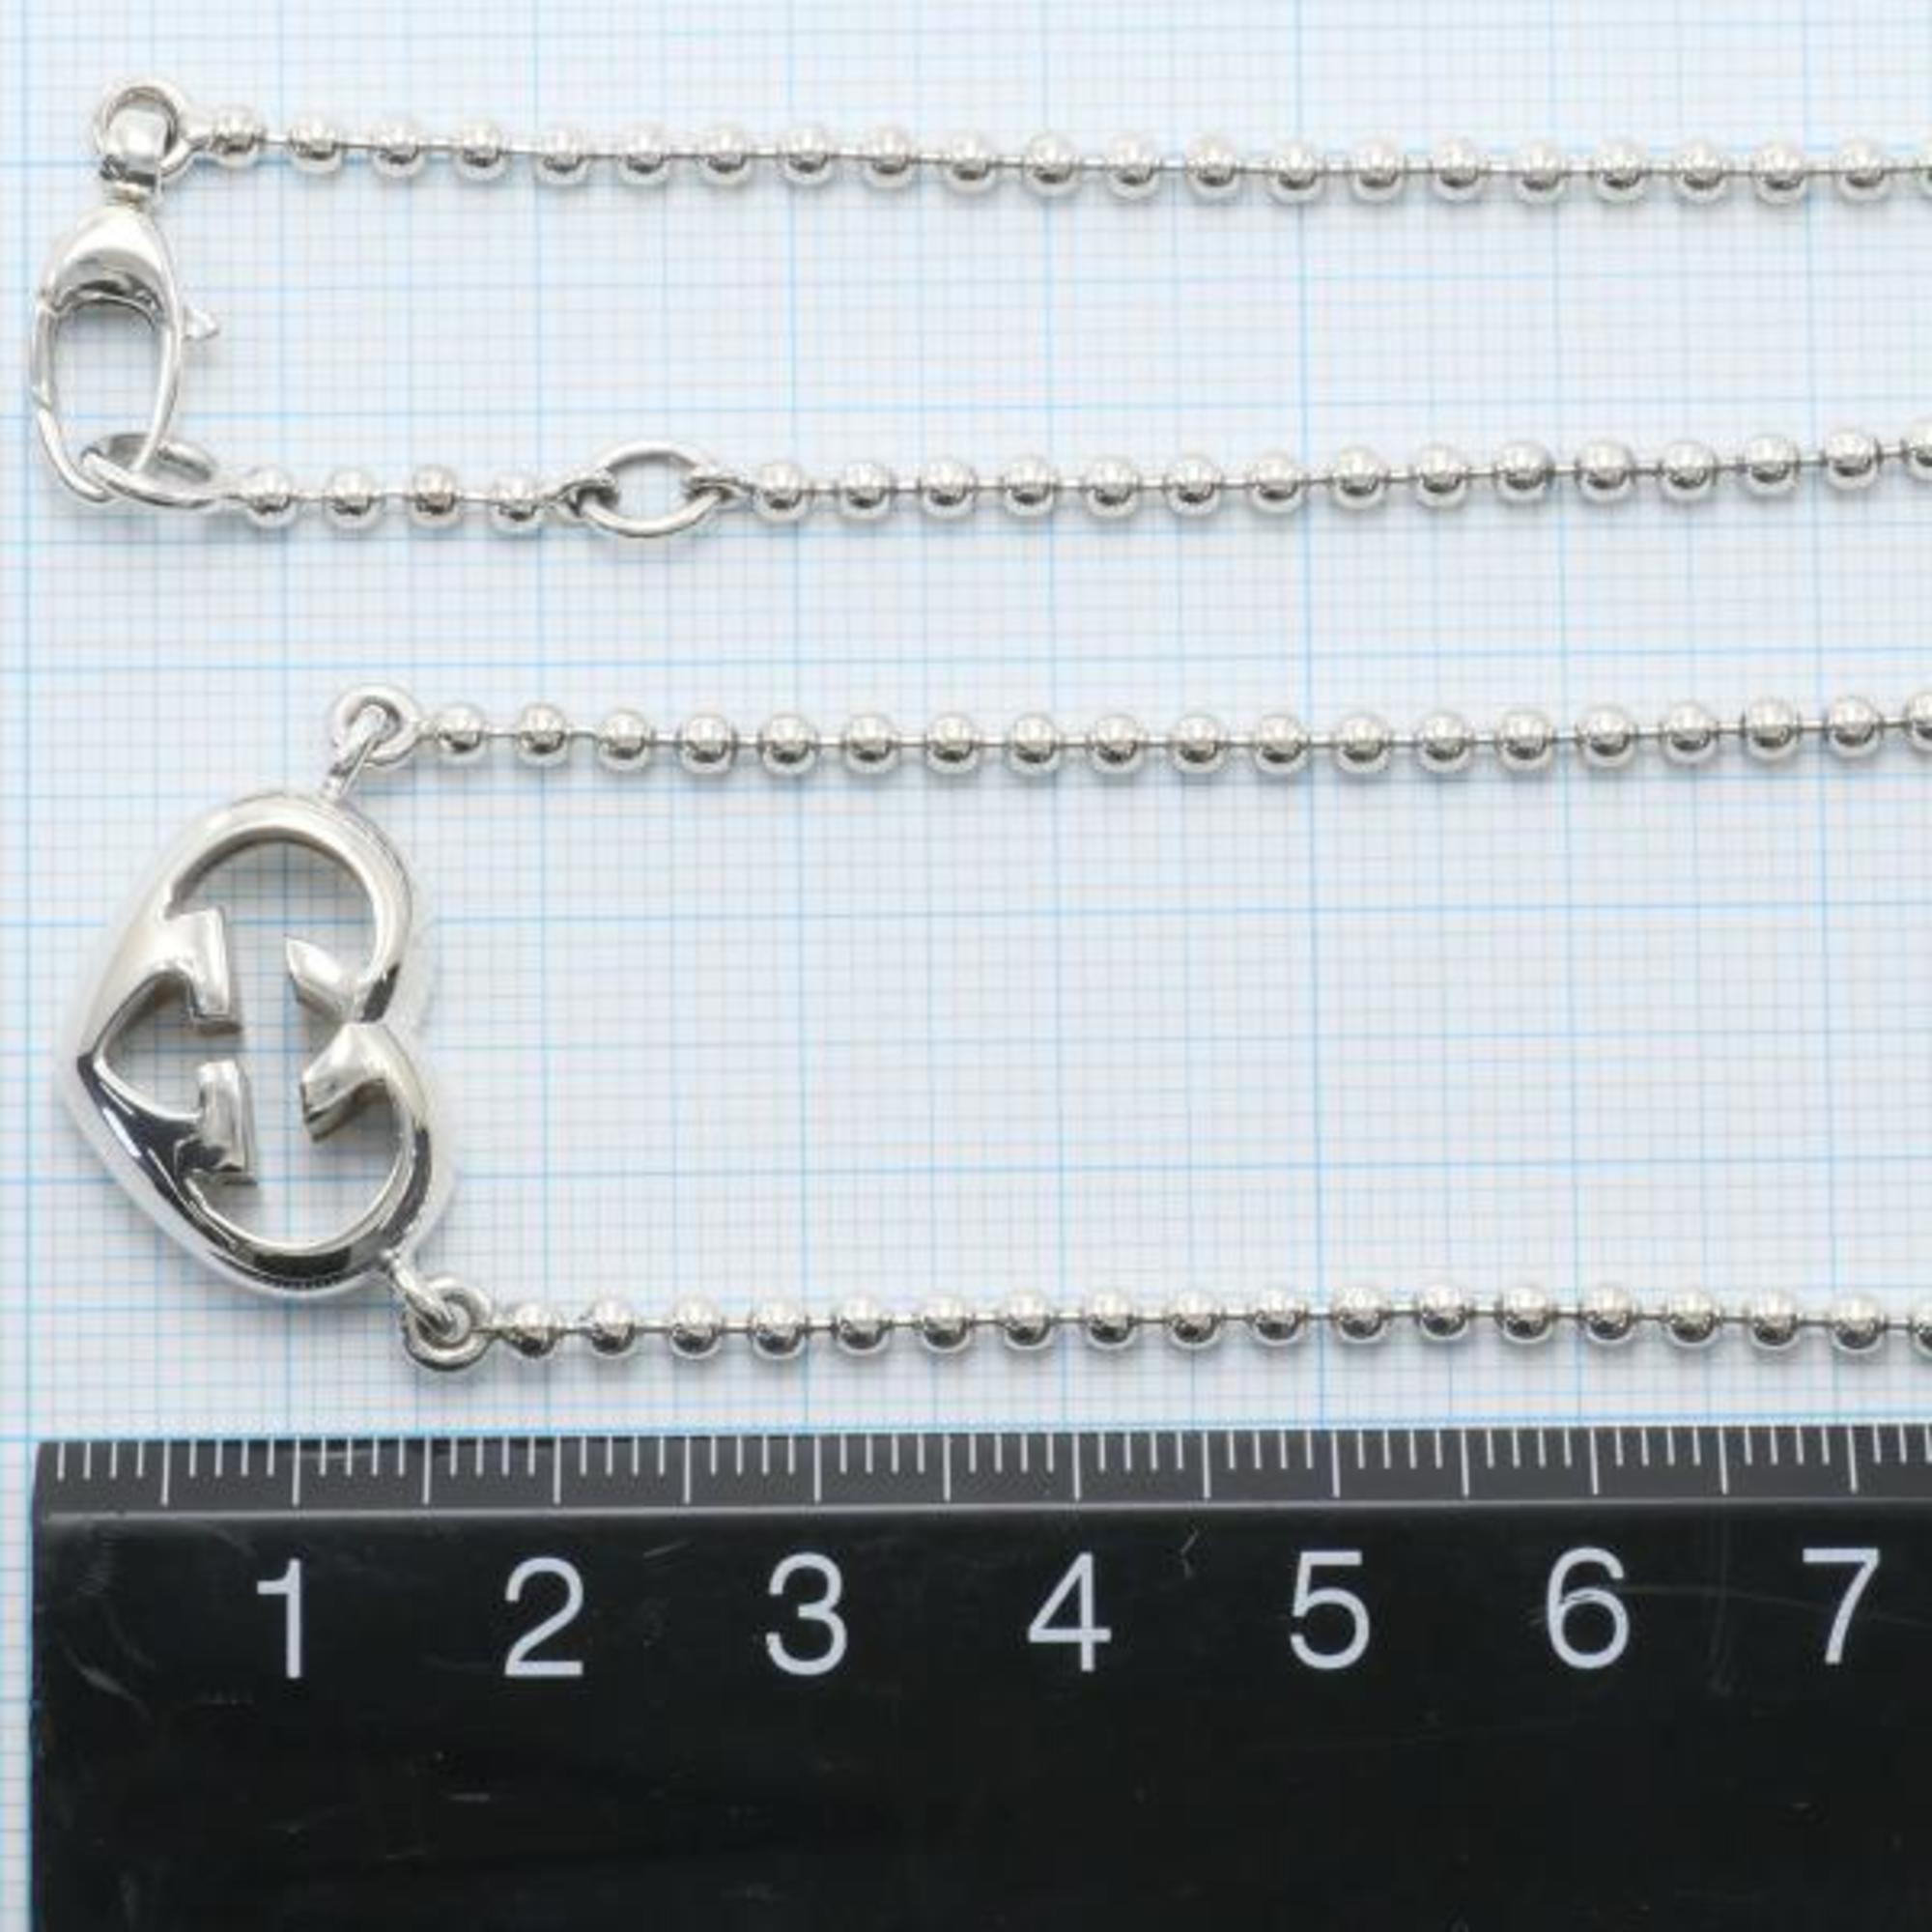 Gucci Interlocking G Heart Silver Necklace Bag Total Weight Approx. 14.8g 40cm Jewelry Wrapping Free